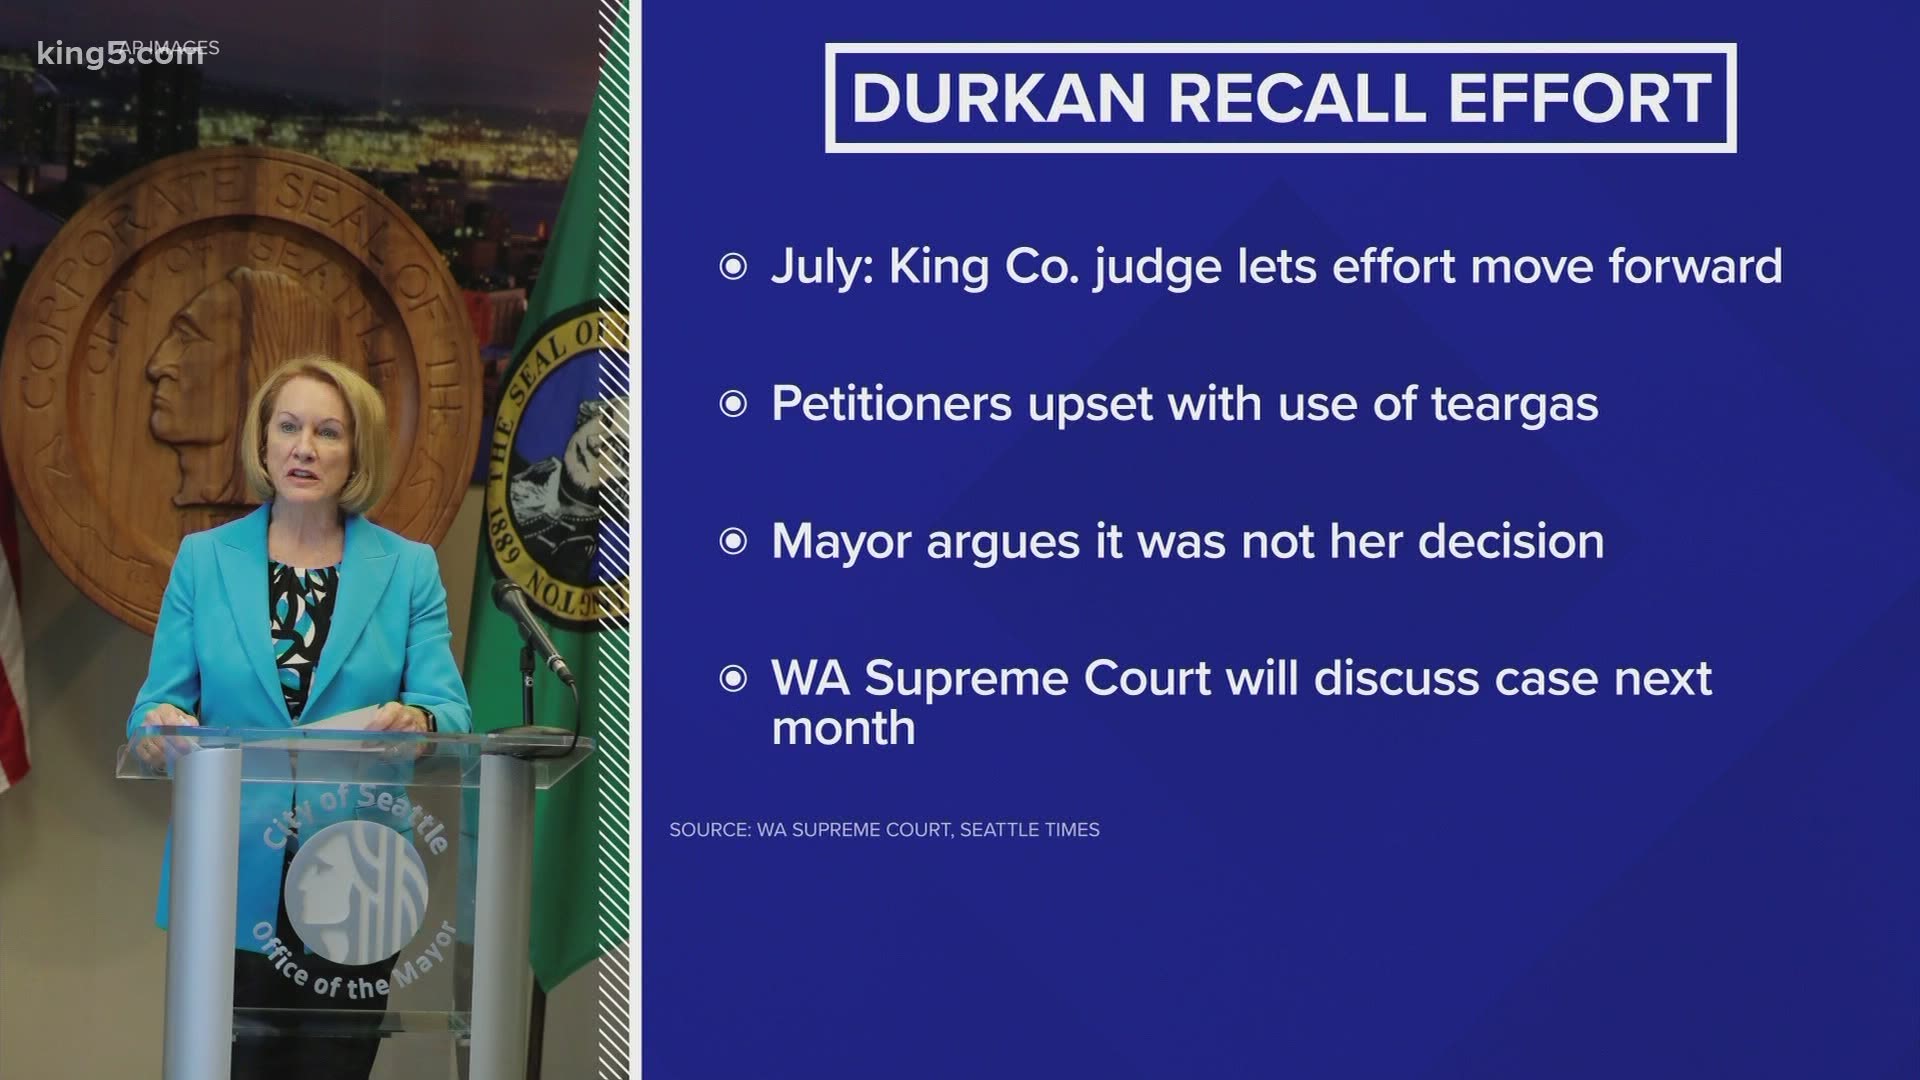 Seattle Mayor Jenny Durkan is arguing that the push to recall her is based on a policy disagreement, not a violation of any law or standard.